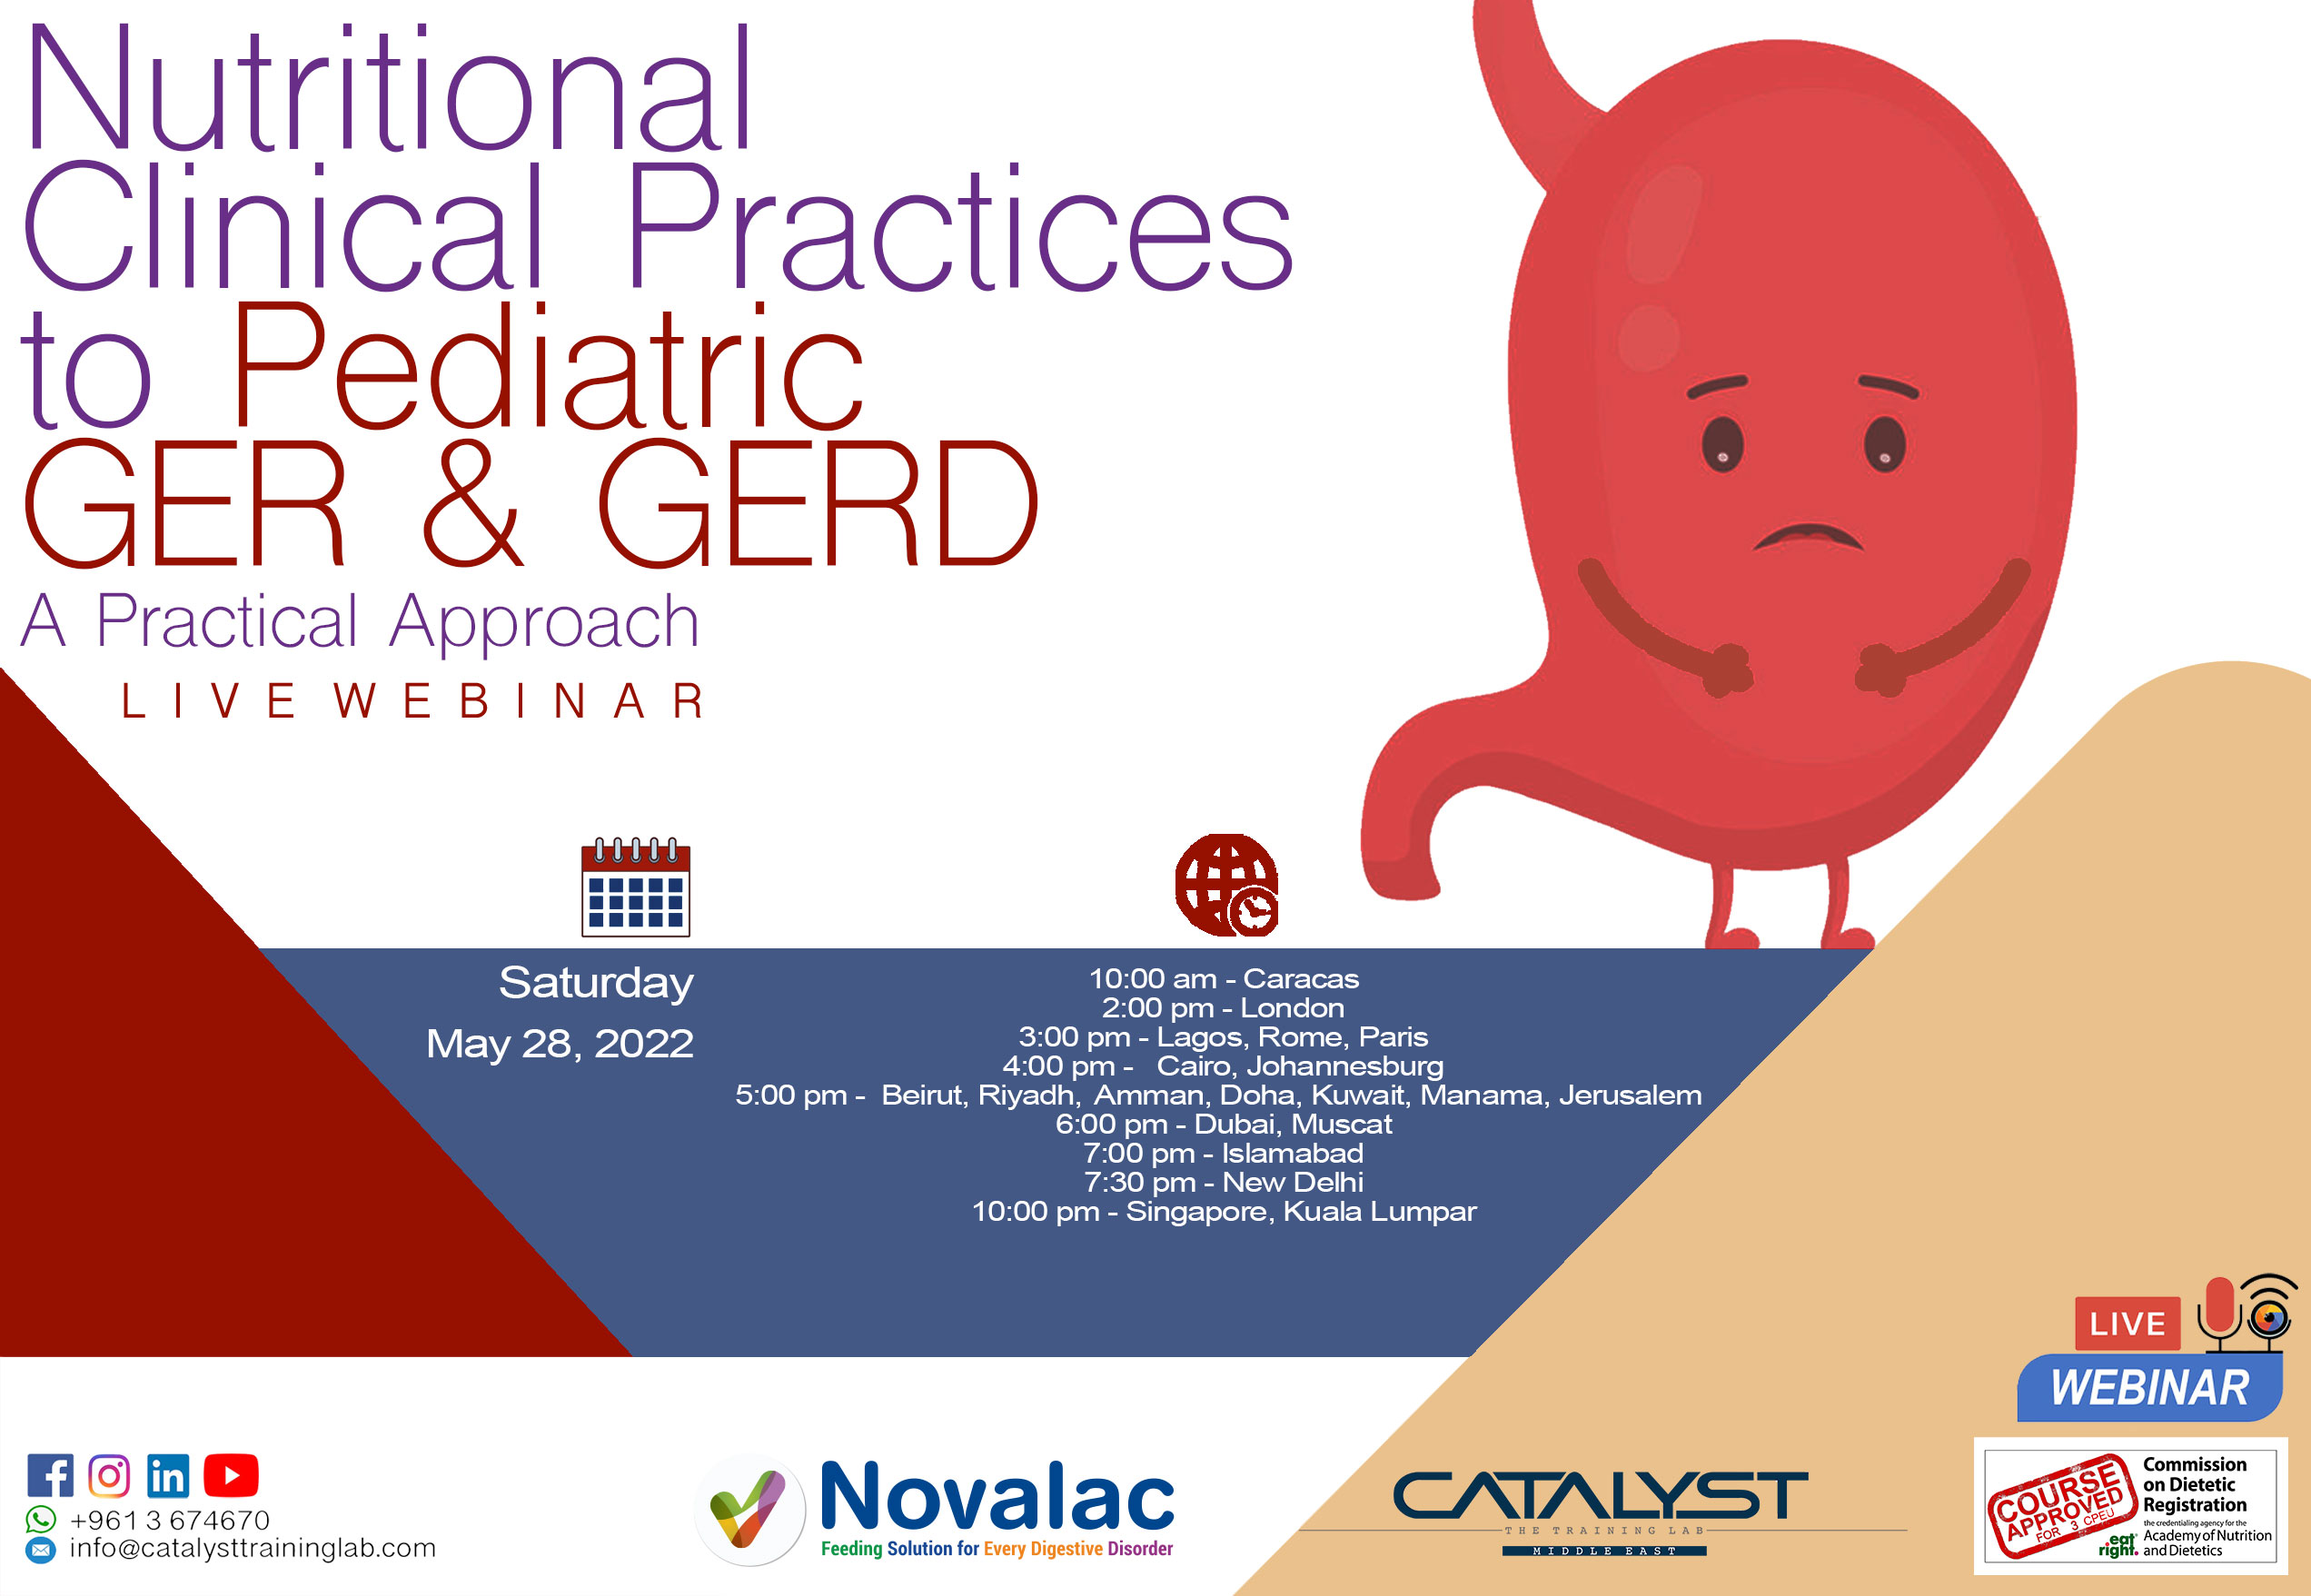 Nutritional Clinical Practices to Pediatric GER & GERD